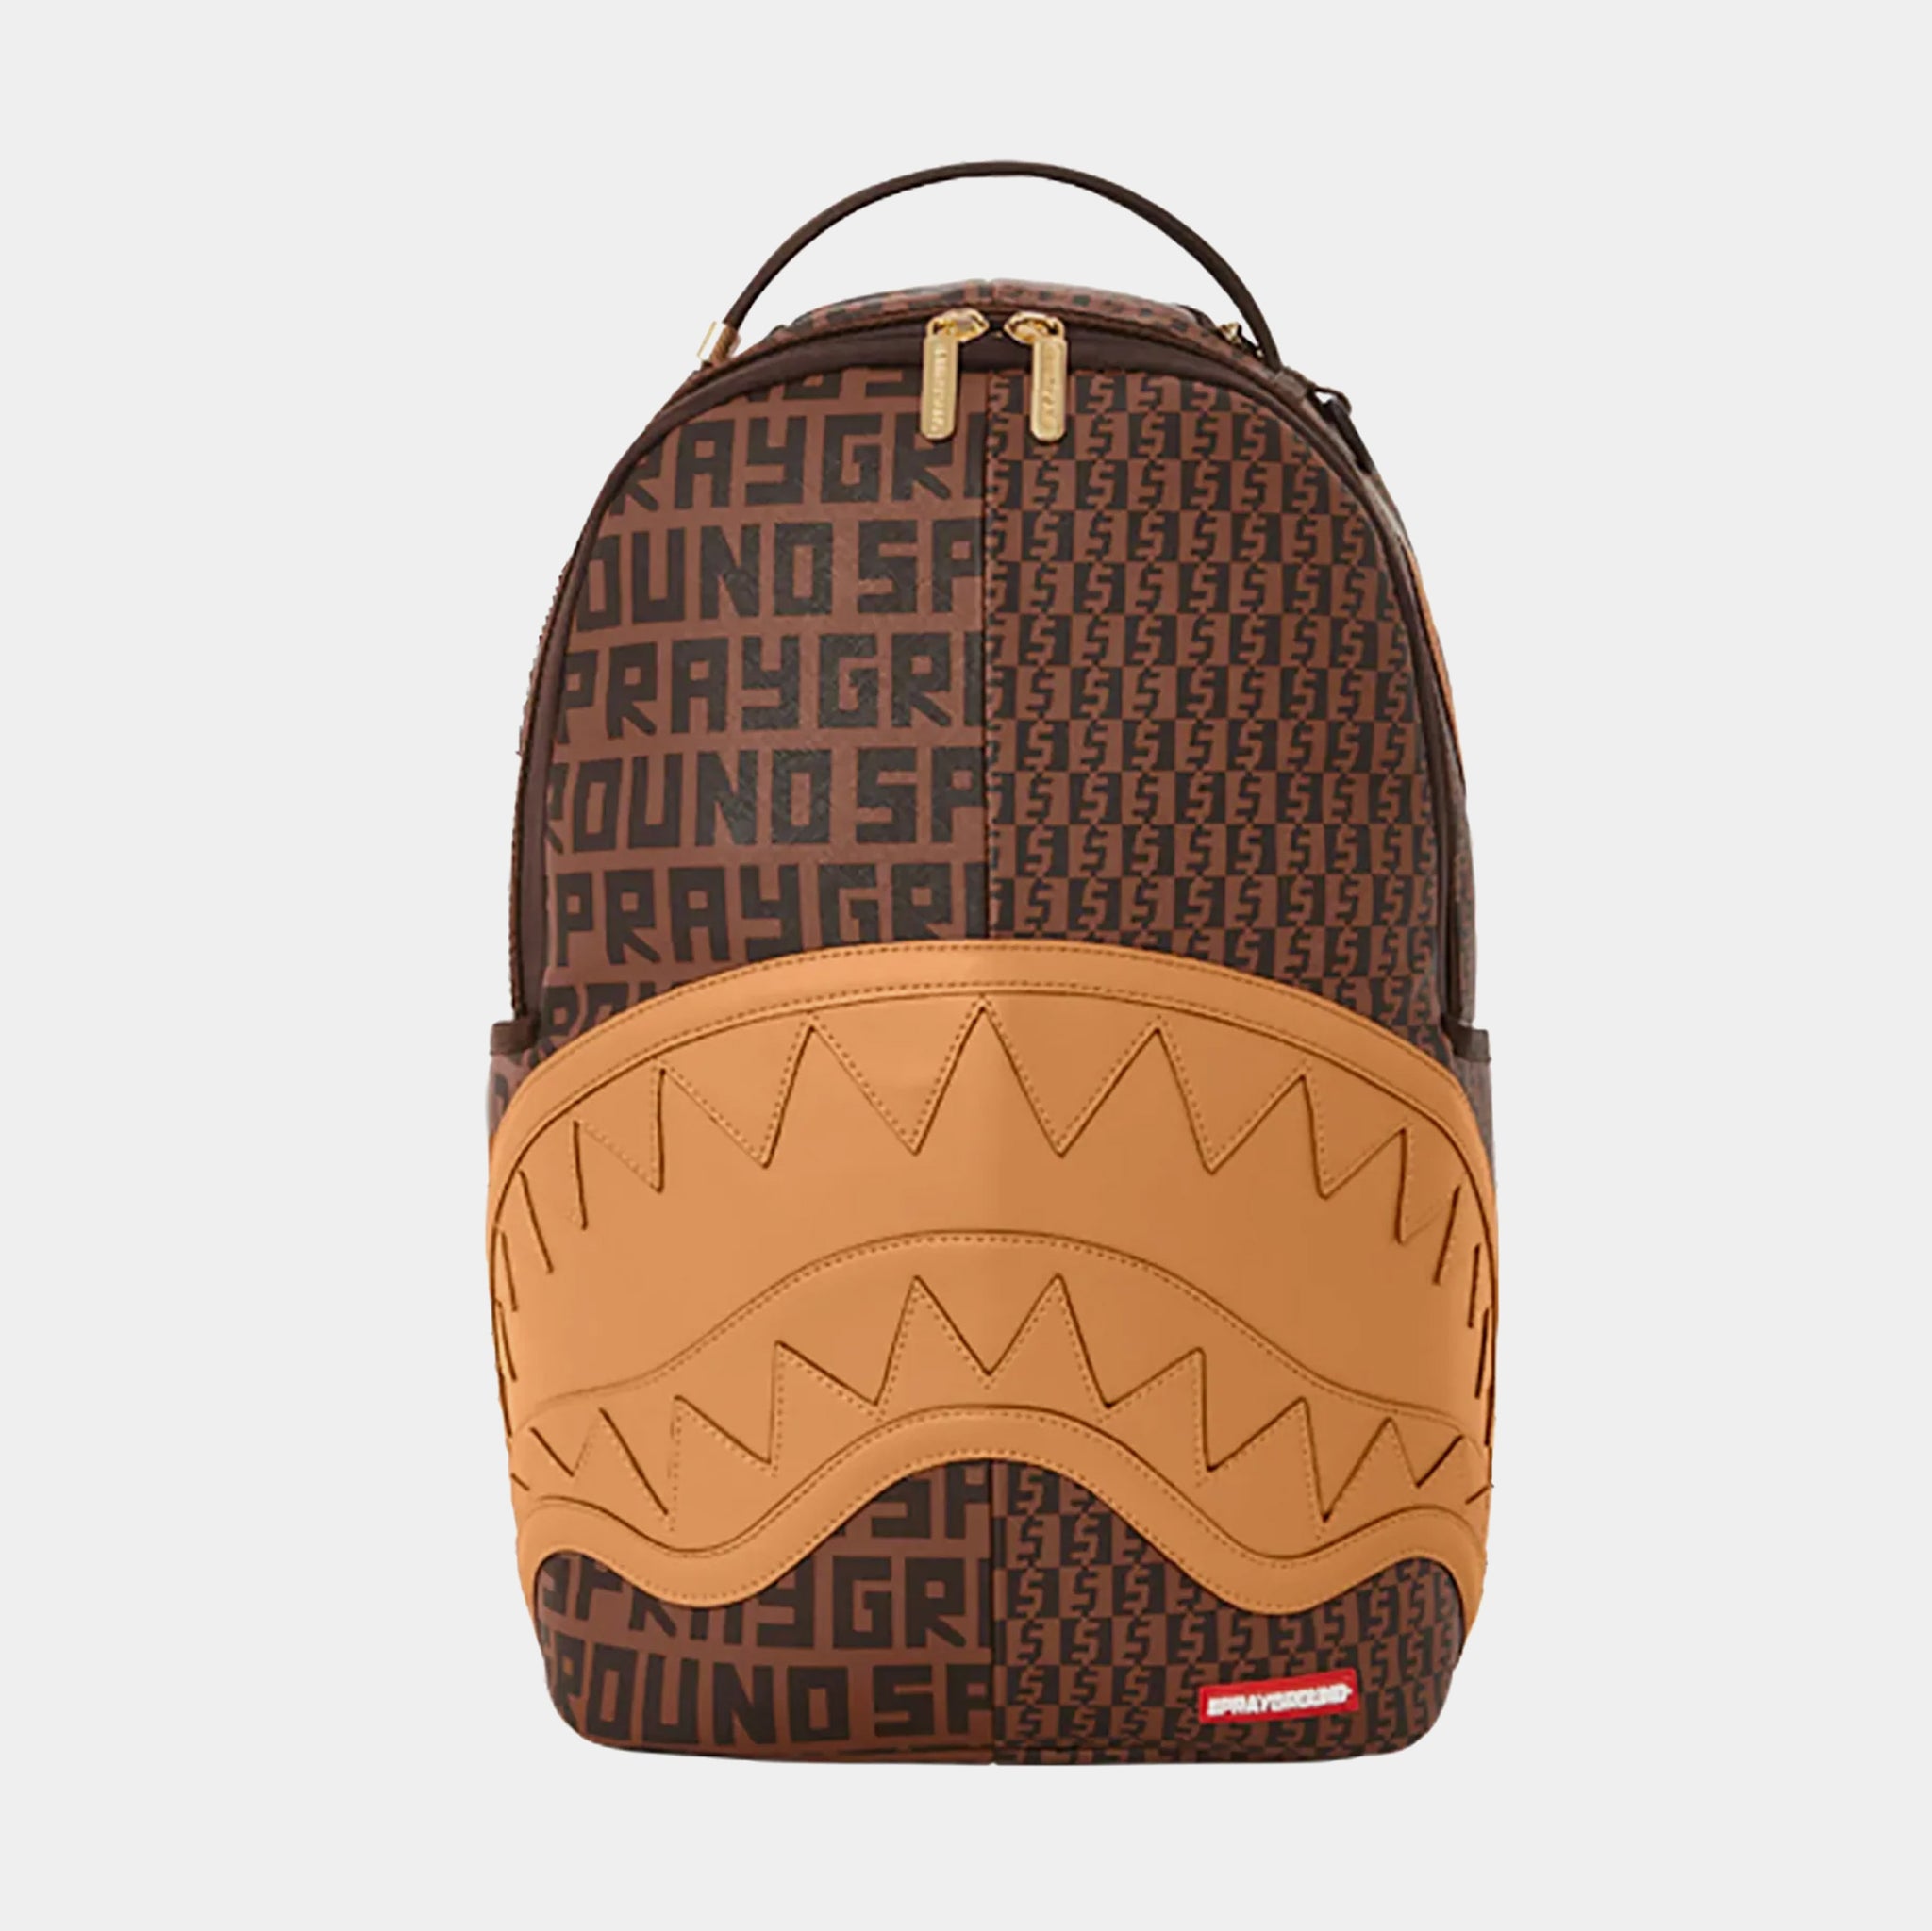 Sprayground Shark In Paris Faux Leather Backpack for Men